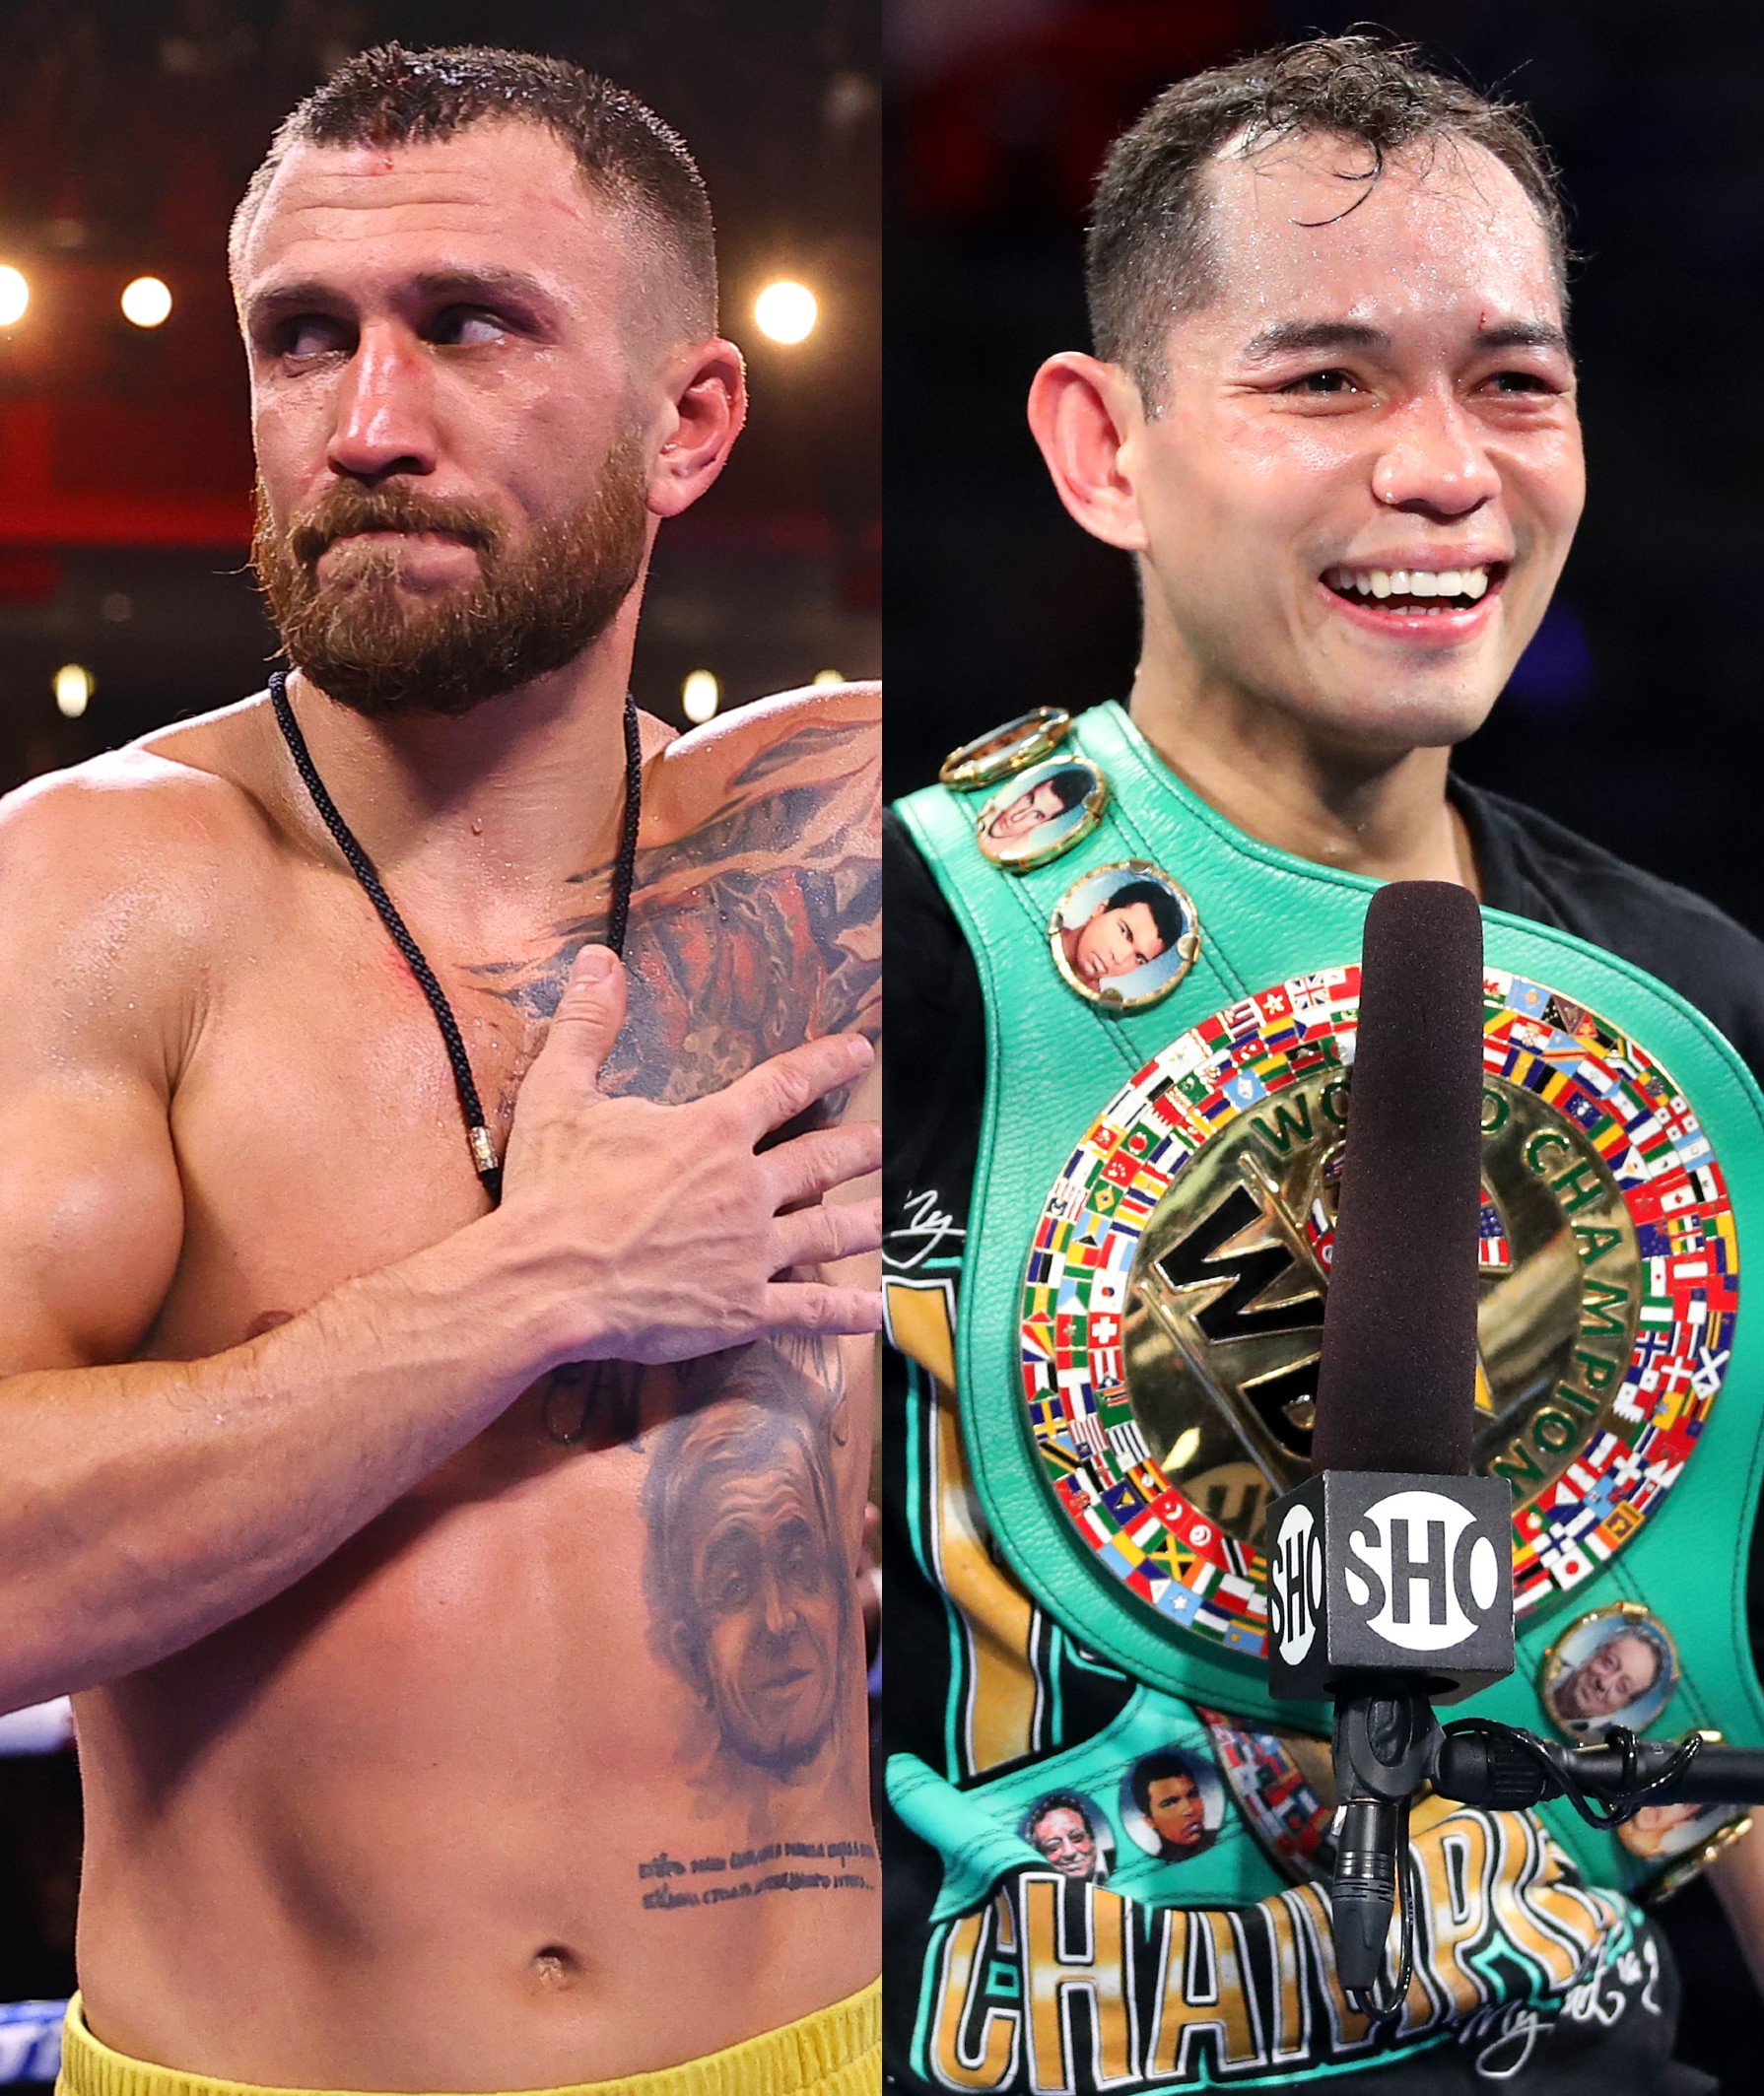 Legends Vasiliy Lomachenko and Nonito Donaire are in action this week